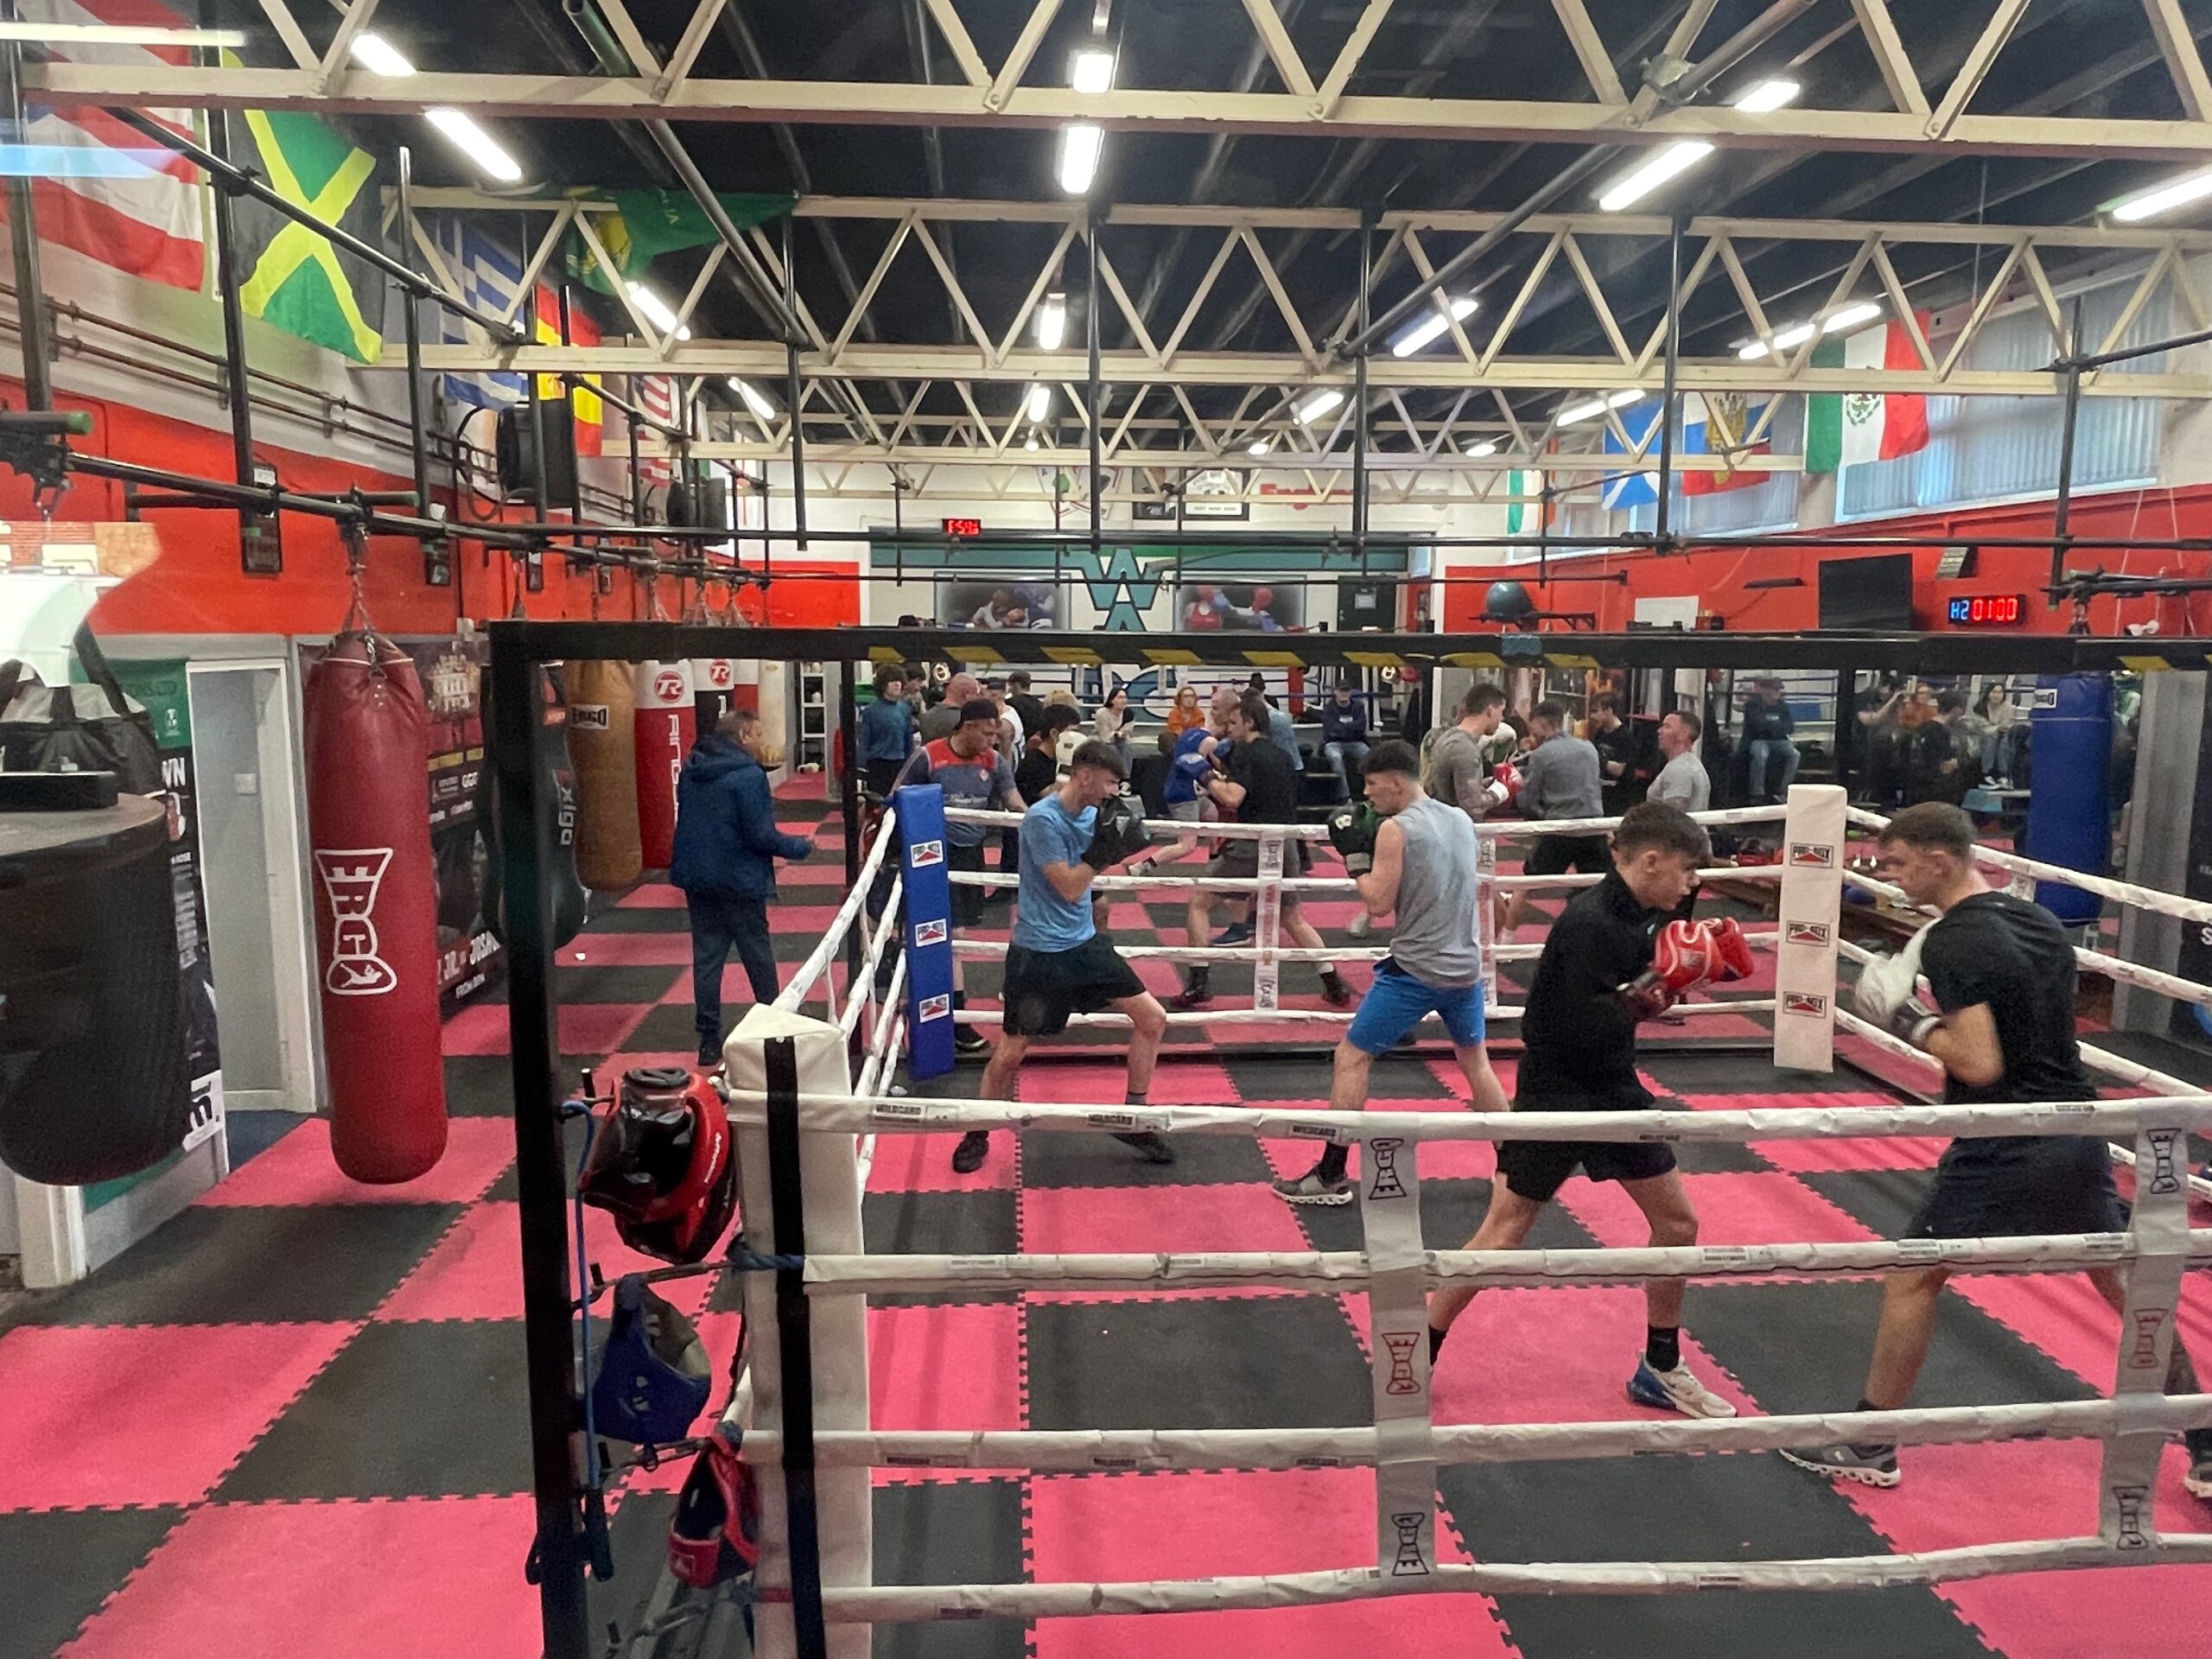 Boxing club with activity